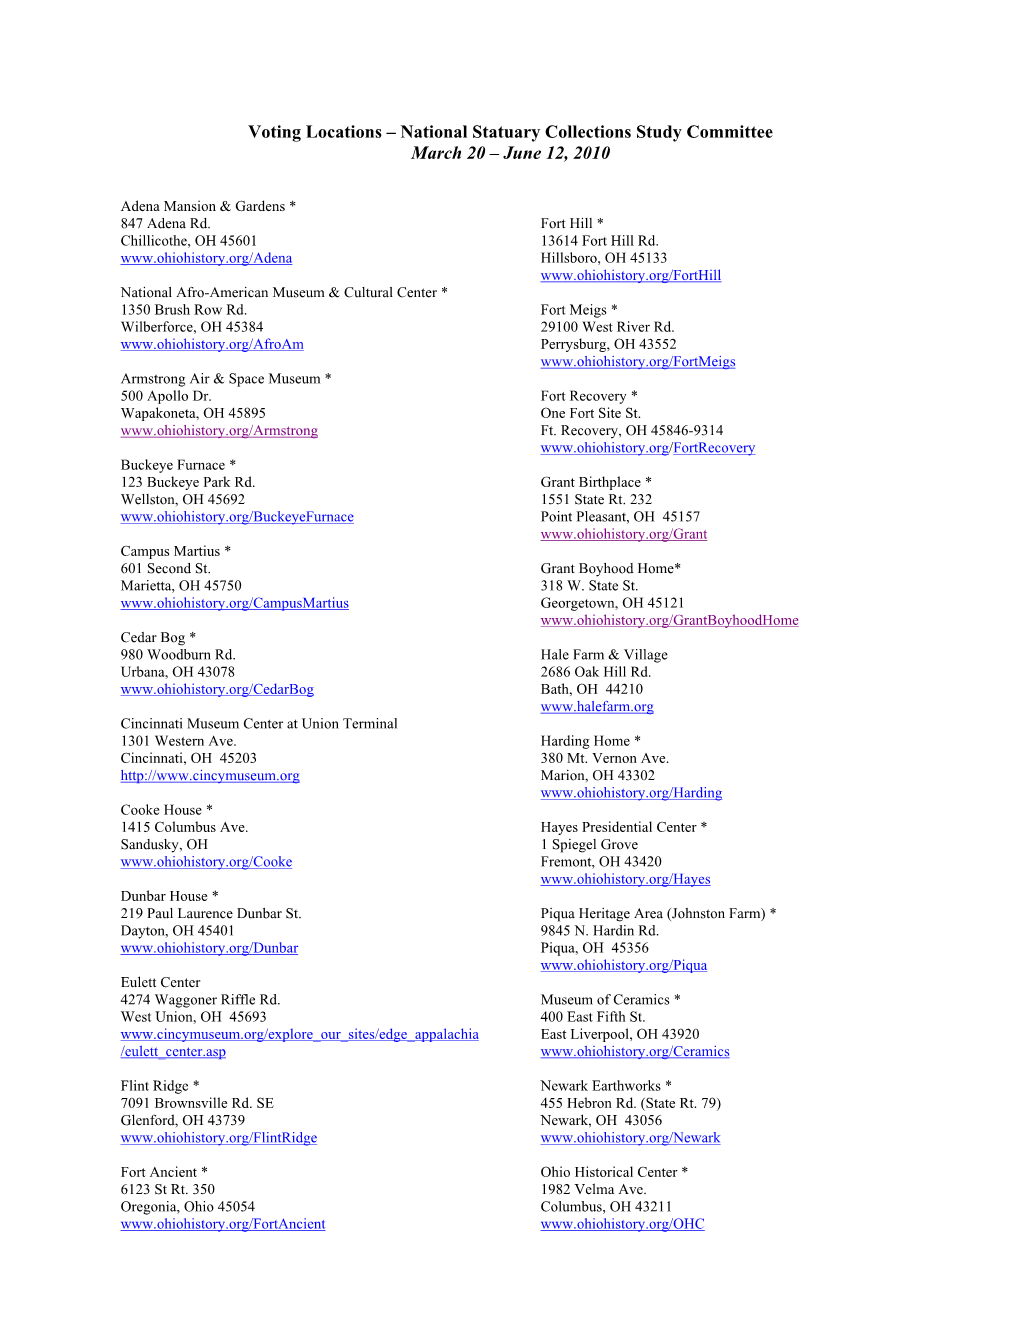 Voting Locations – National Statuary Collections Study Committee March 20 – June 12, 2010